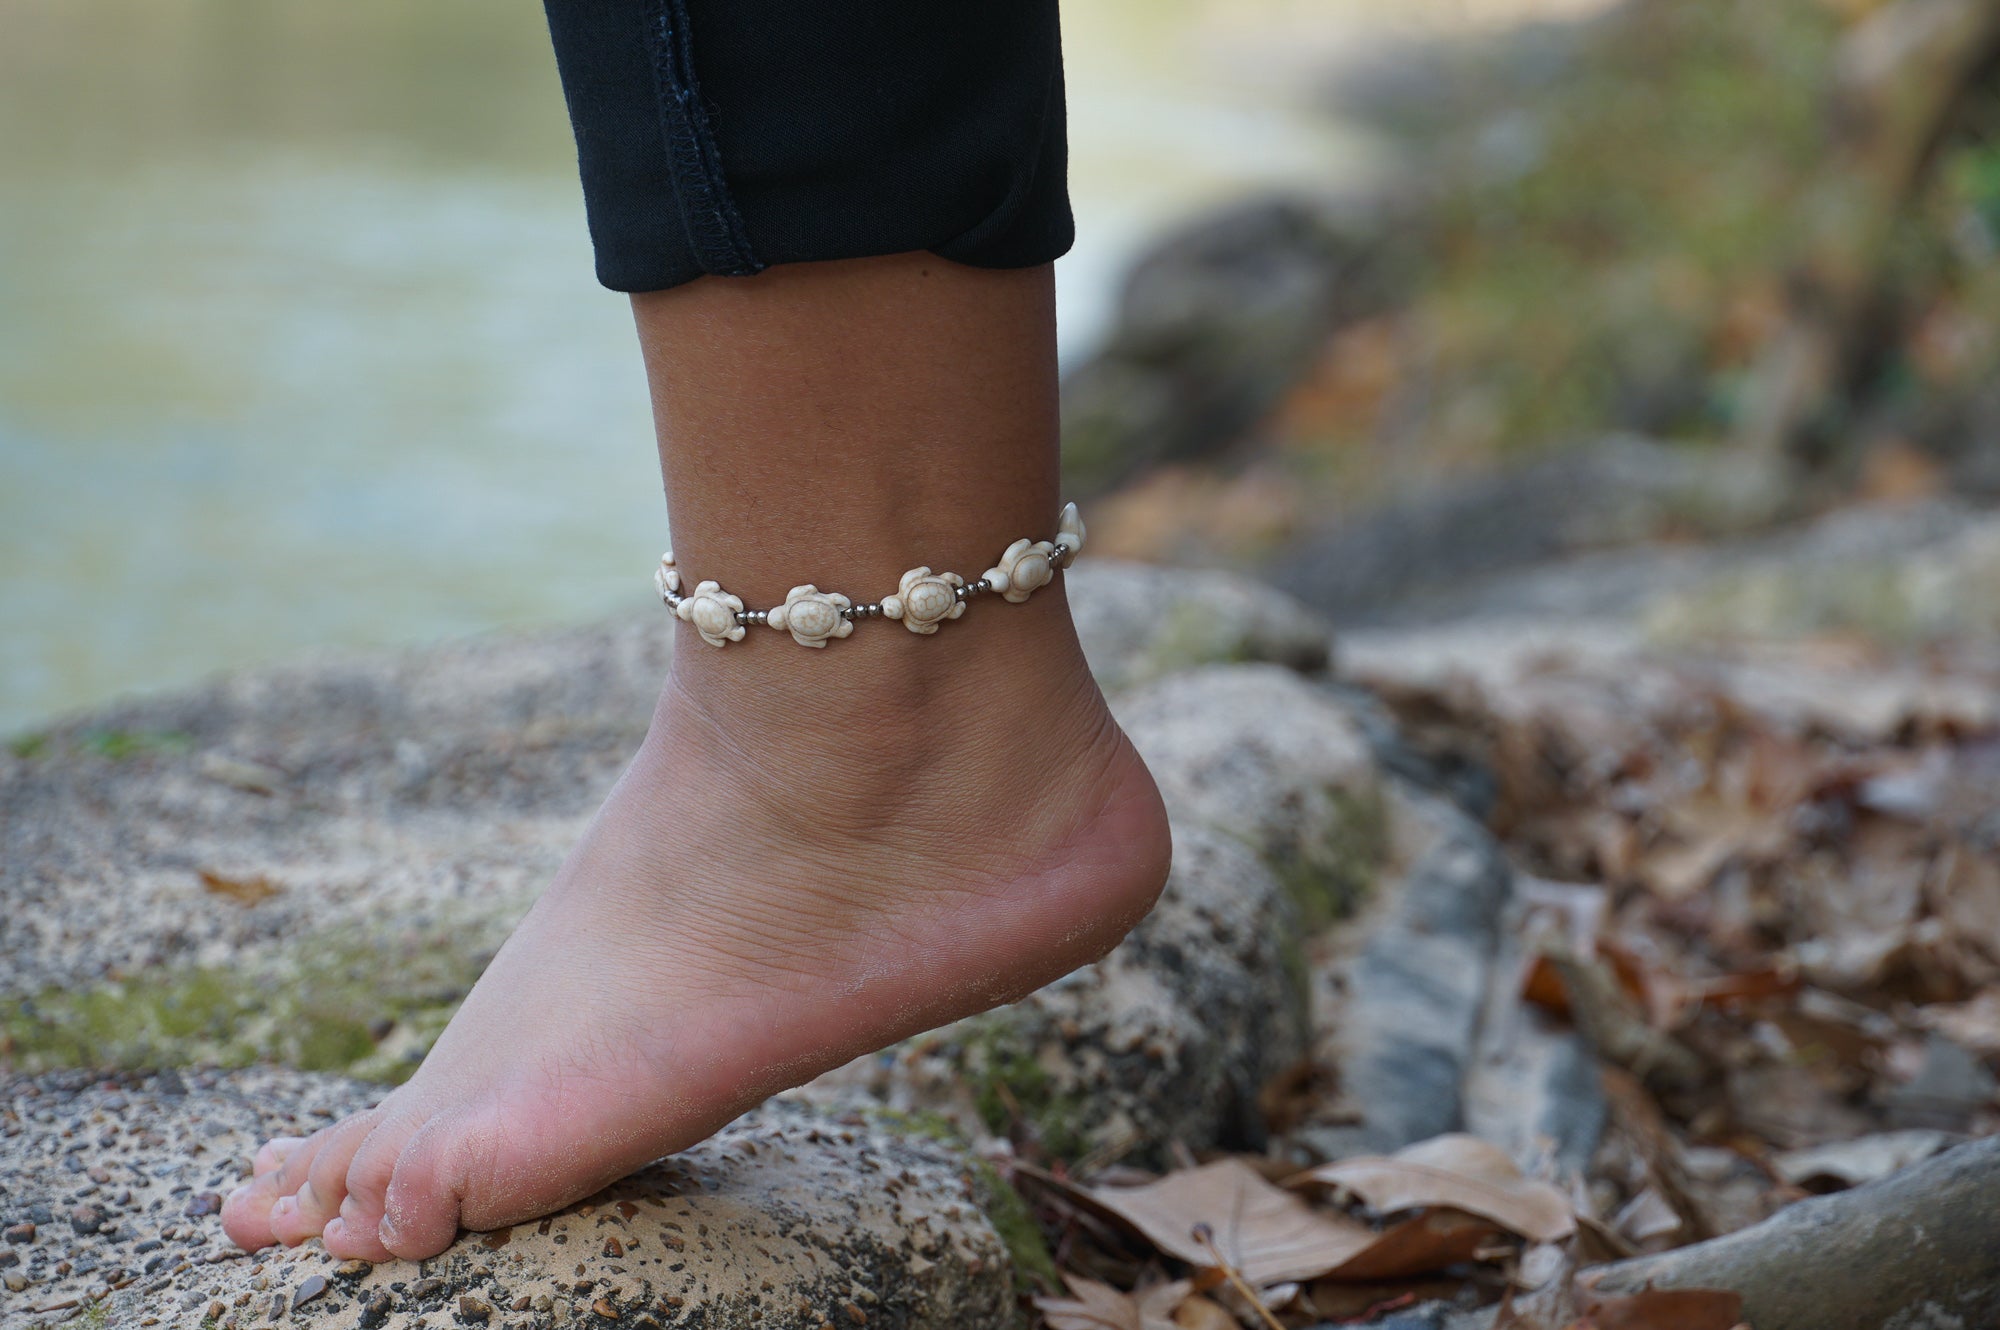 Handcrafted Elephant Boho Silver Anklet - Hypoallergenic Beaded Design with Cute Bells, 10 Inches Long - Other Accessories - Bijou Her -  -  - 